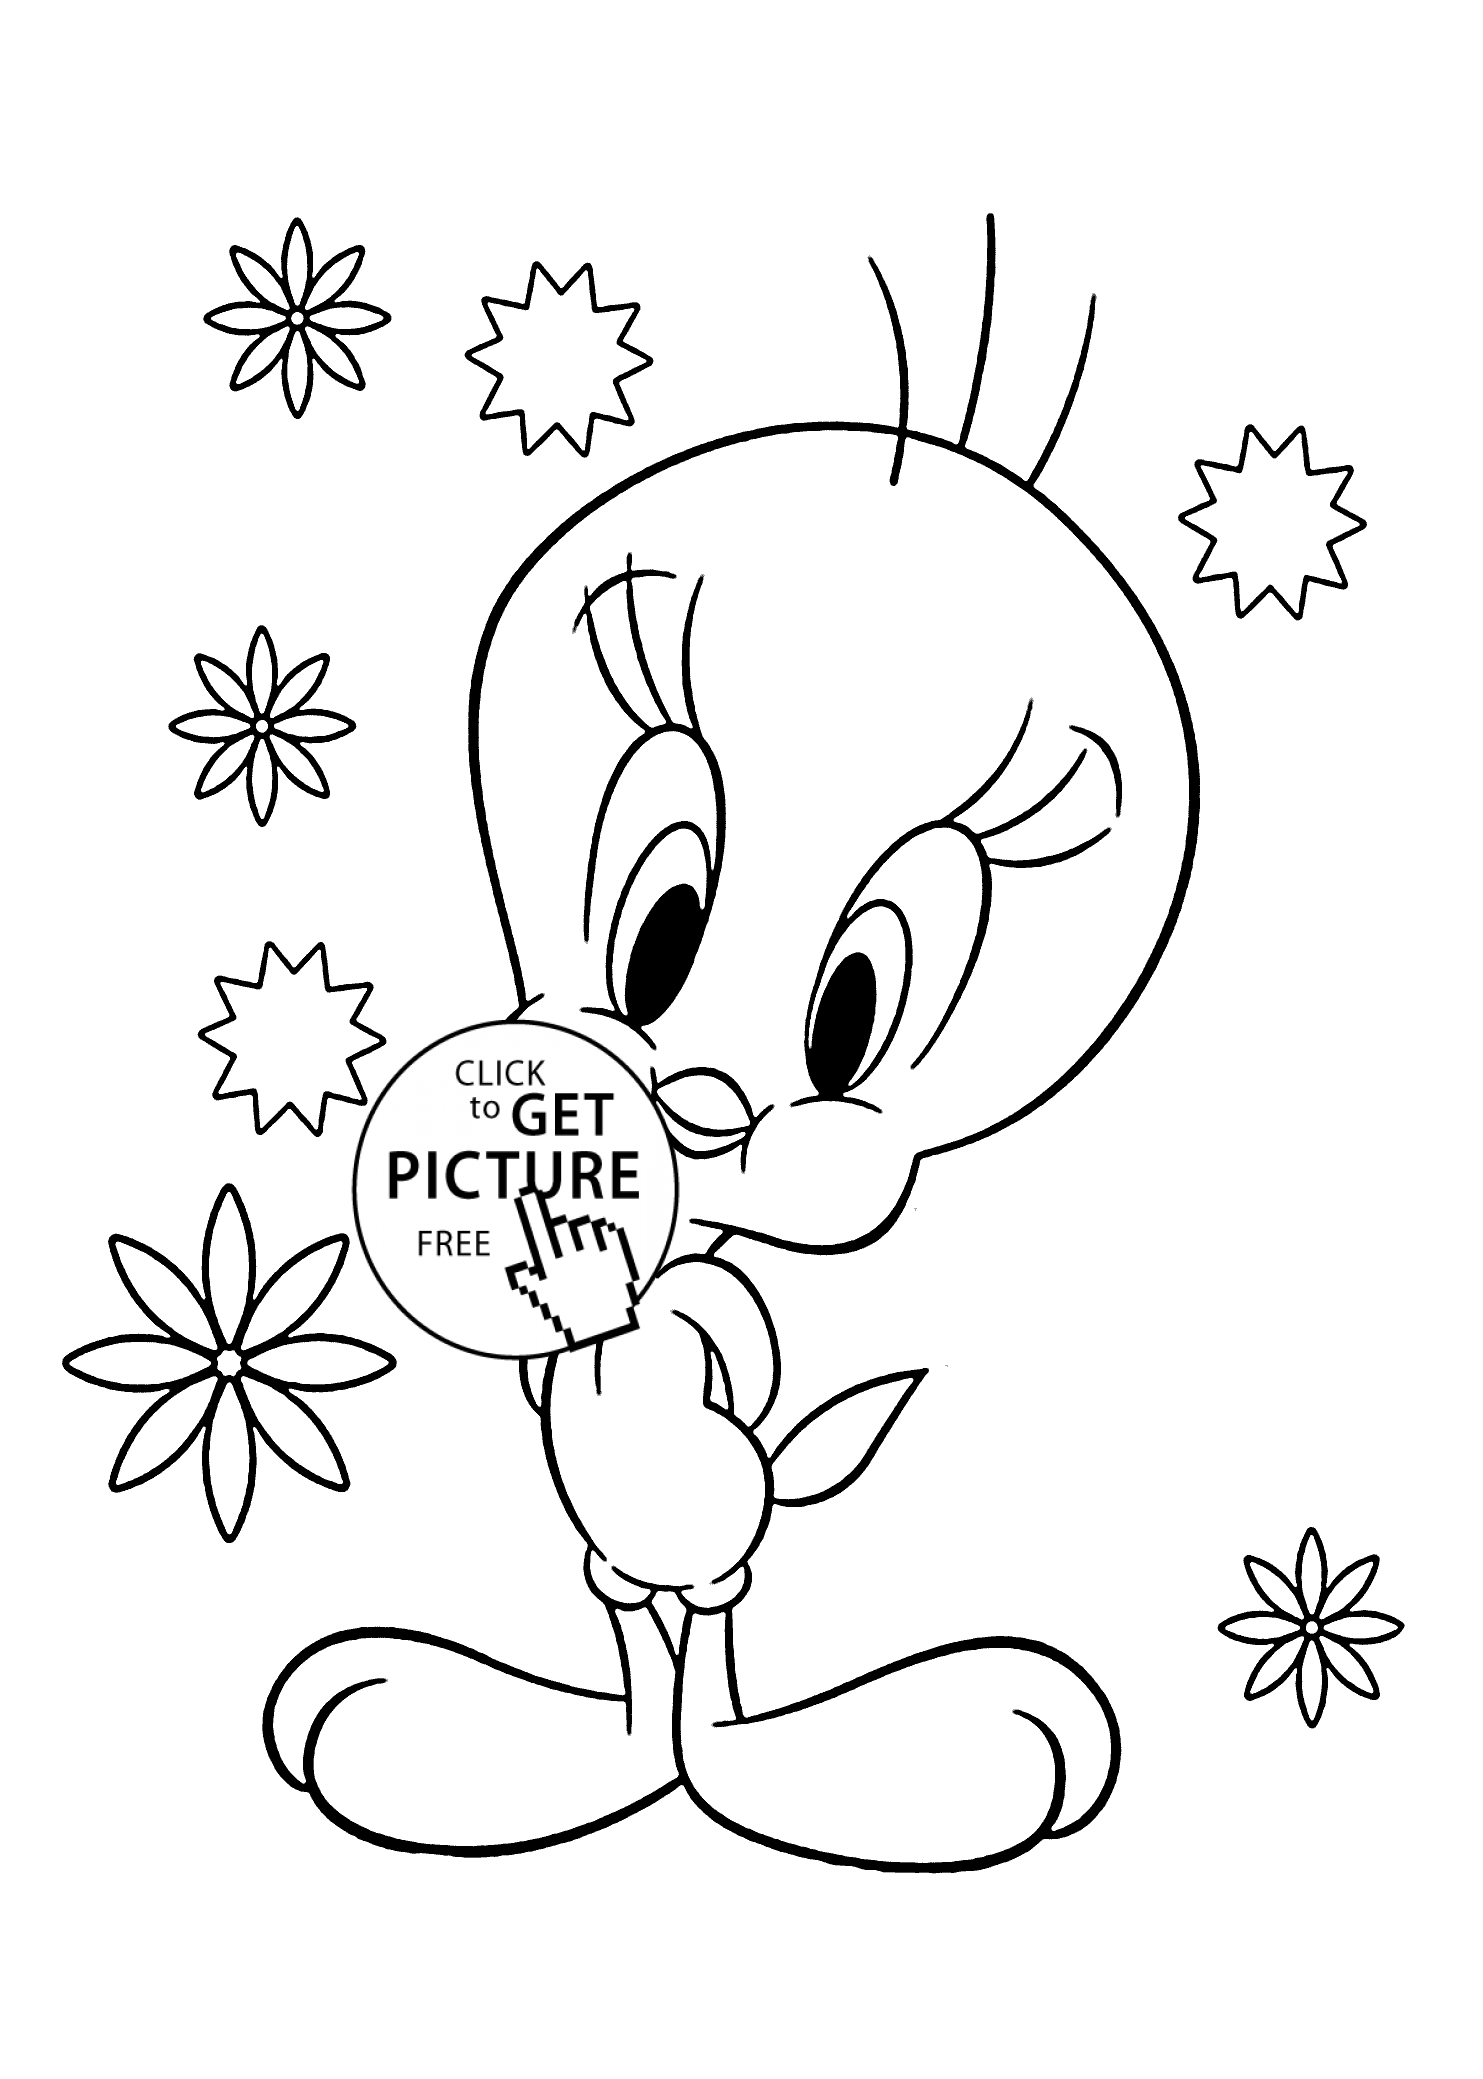 Cute Tweety bird coloring pages for kids, printable free | coloing-4kids.com